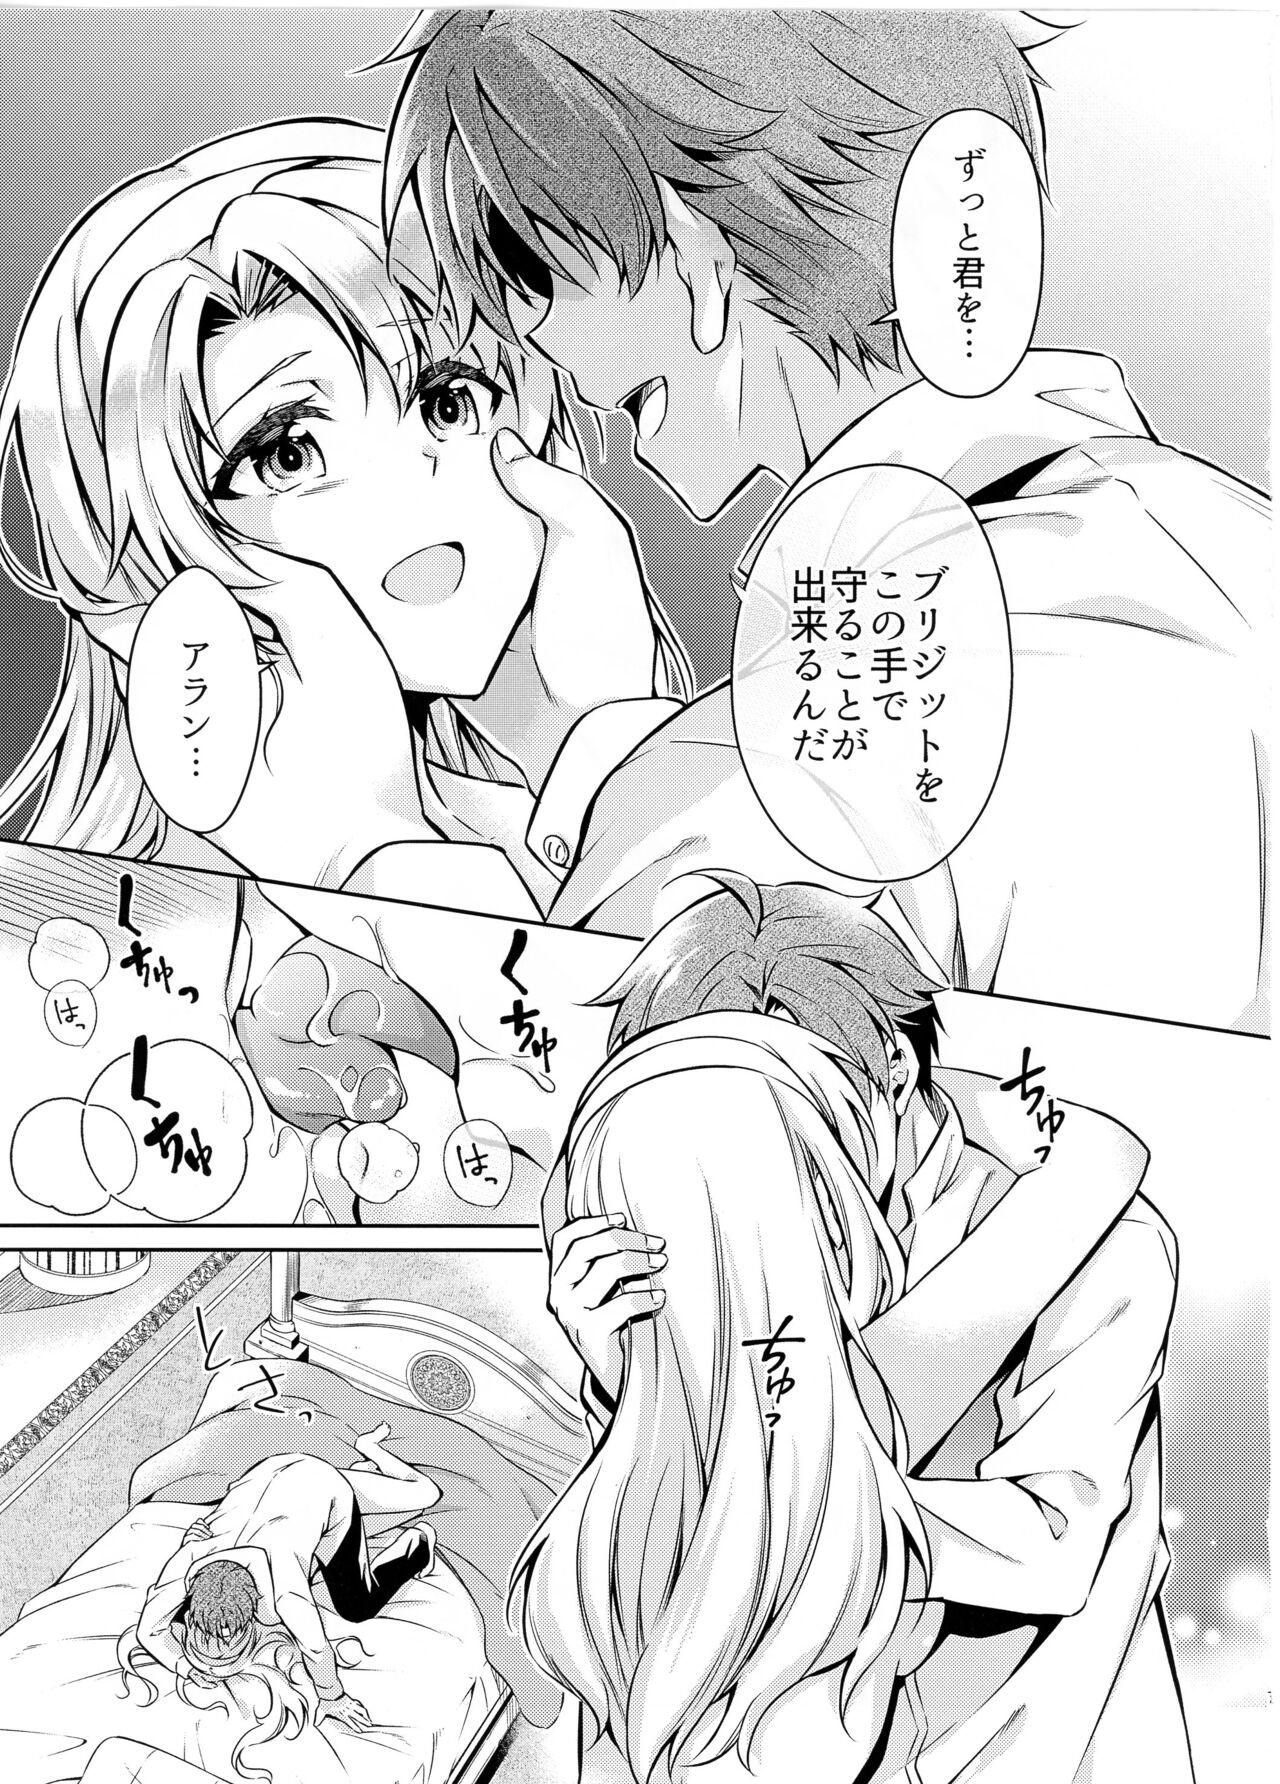 Pene Affection & Blessing - The legend of heroes | eiyuu densetsu Indonesia - Page 7